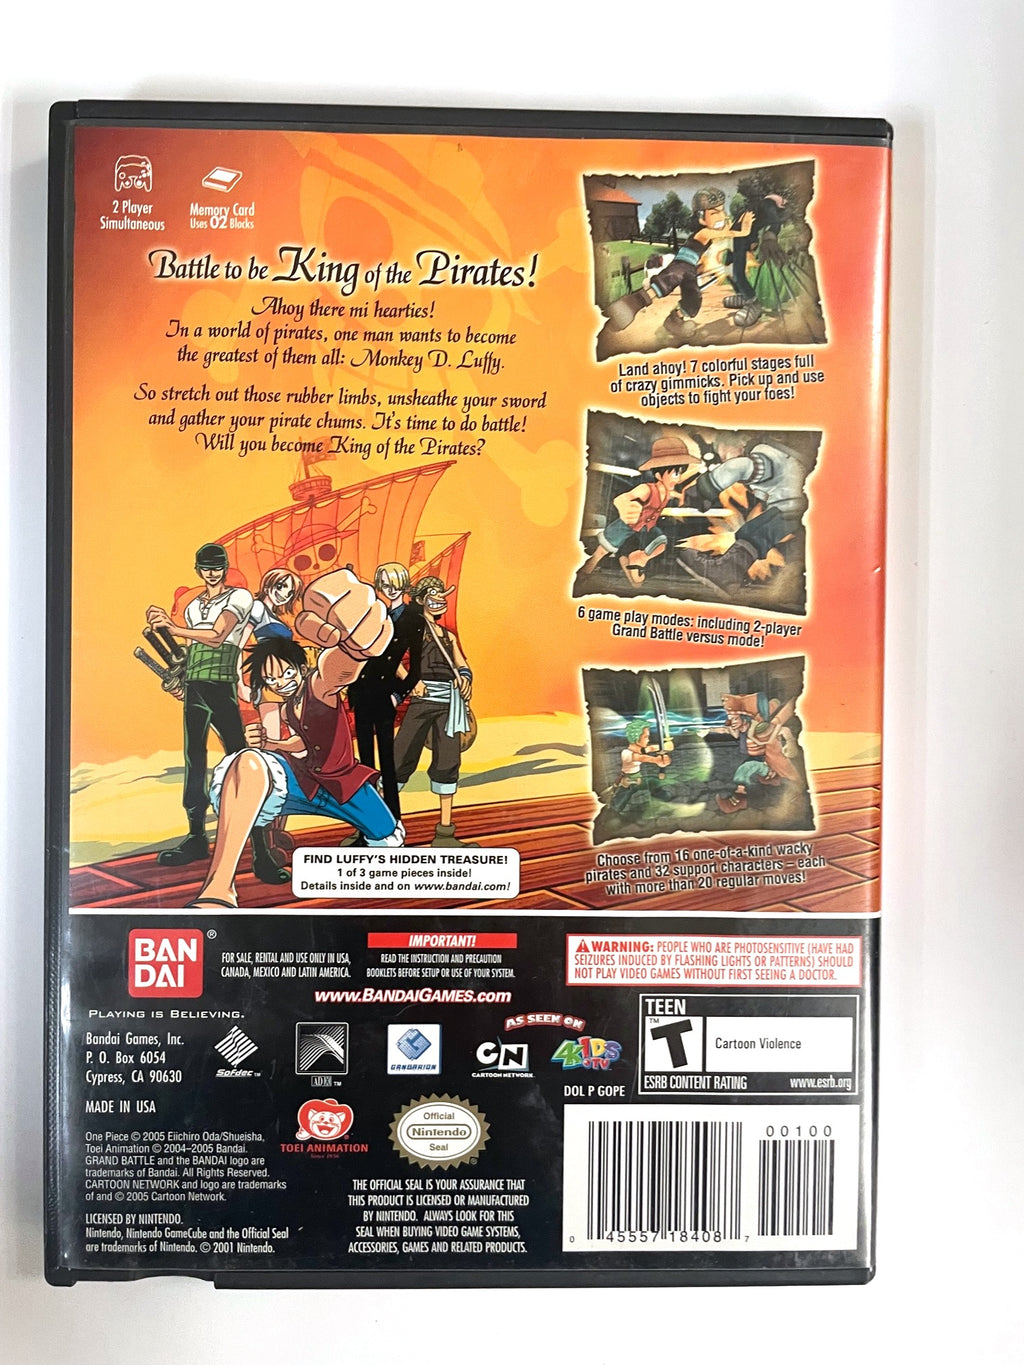 Video Game Print Ads — 'One Piece: Grand Battle' [PS2 / GCN / GBA] [USA]